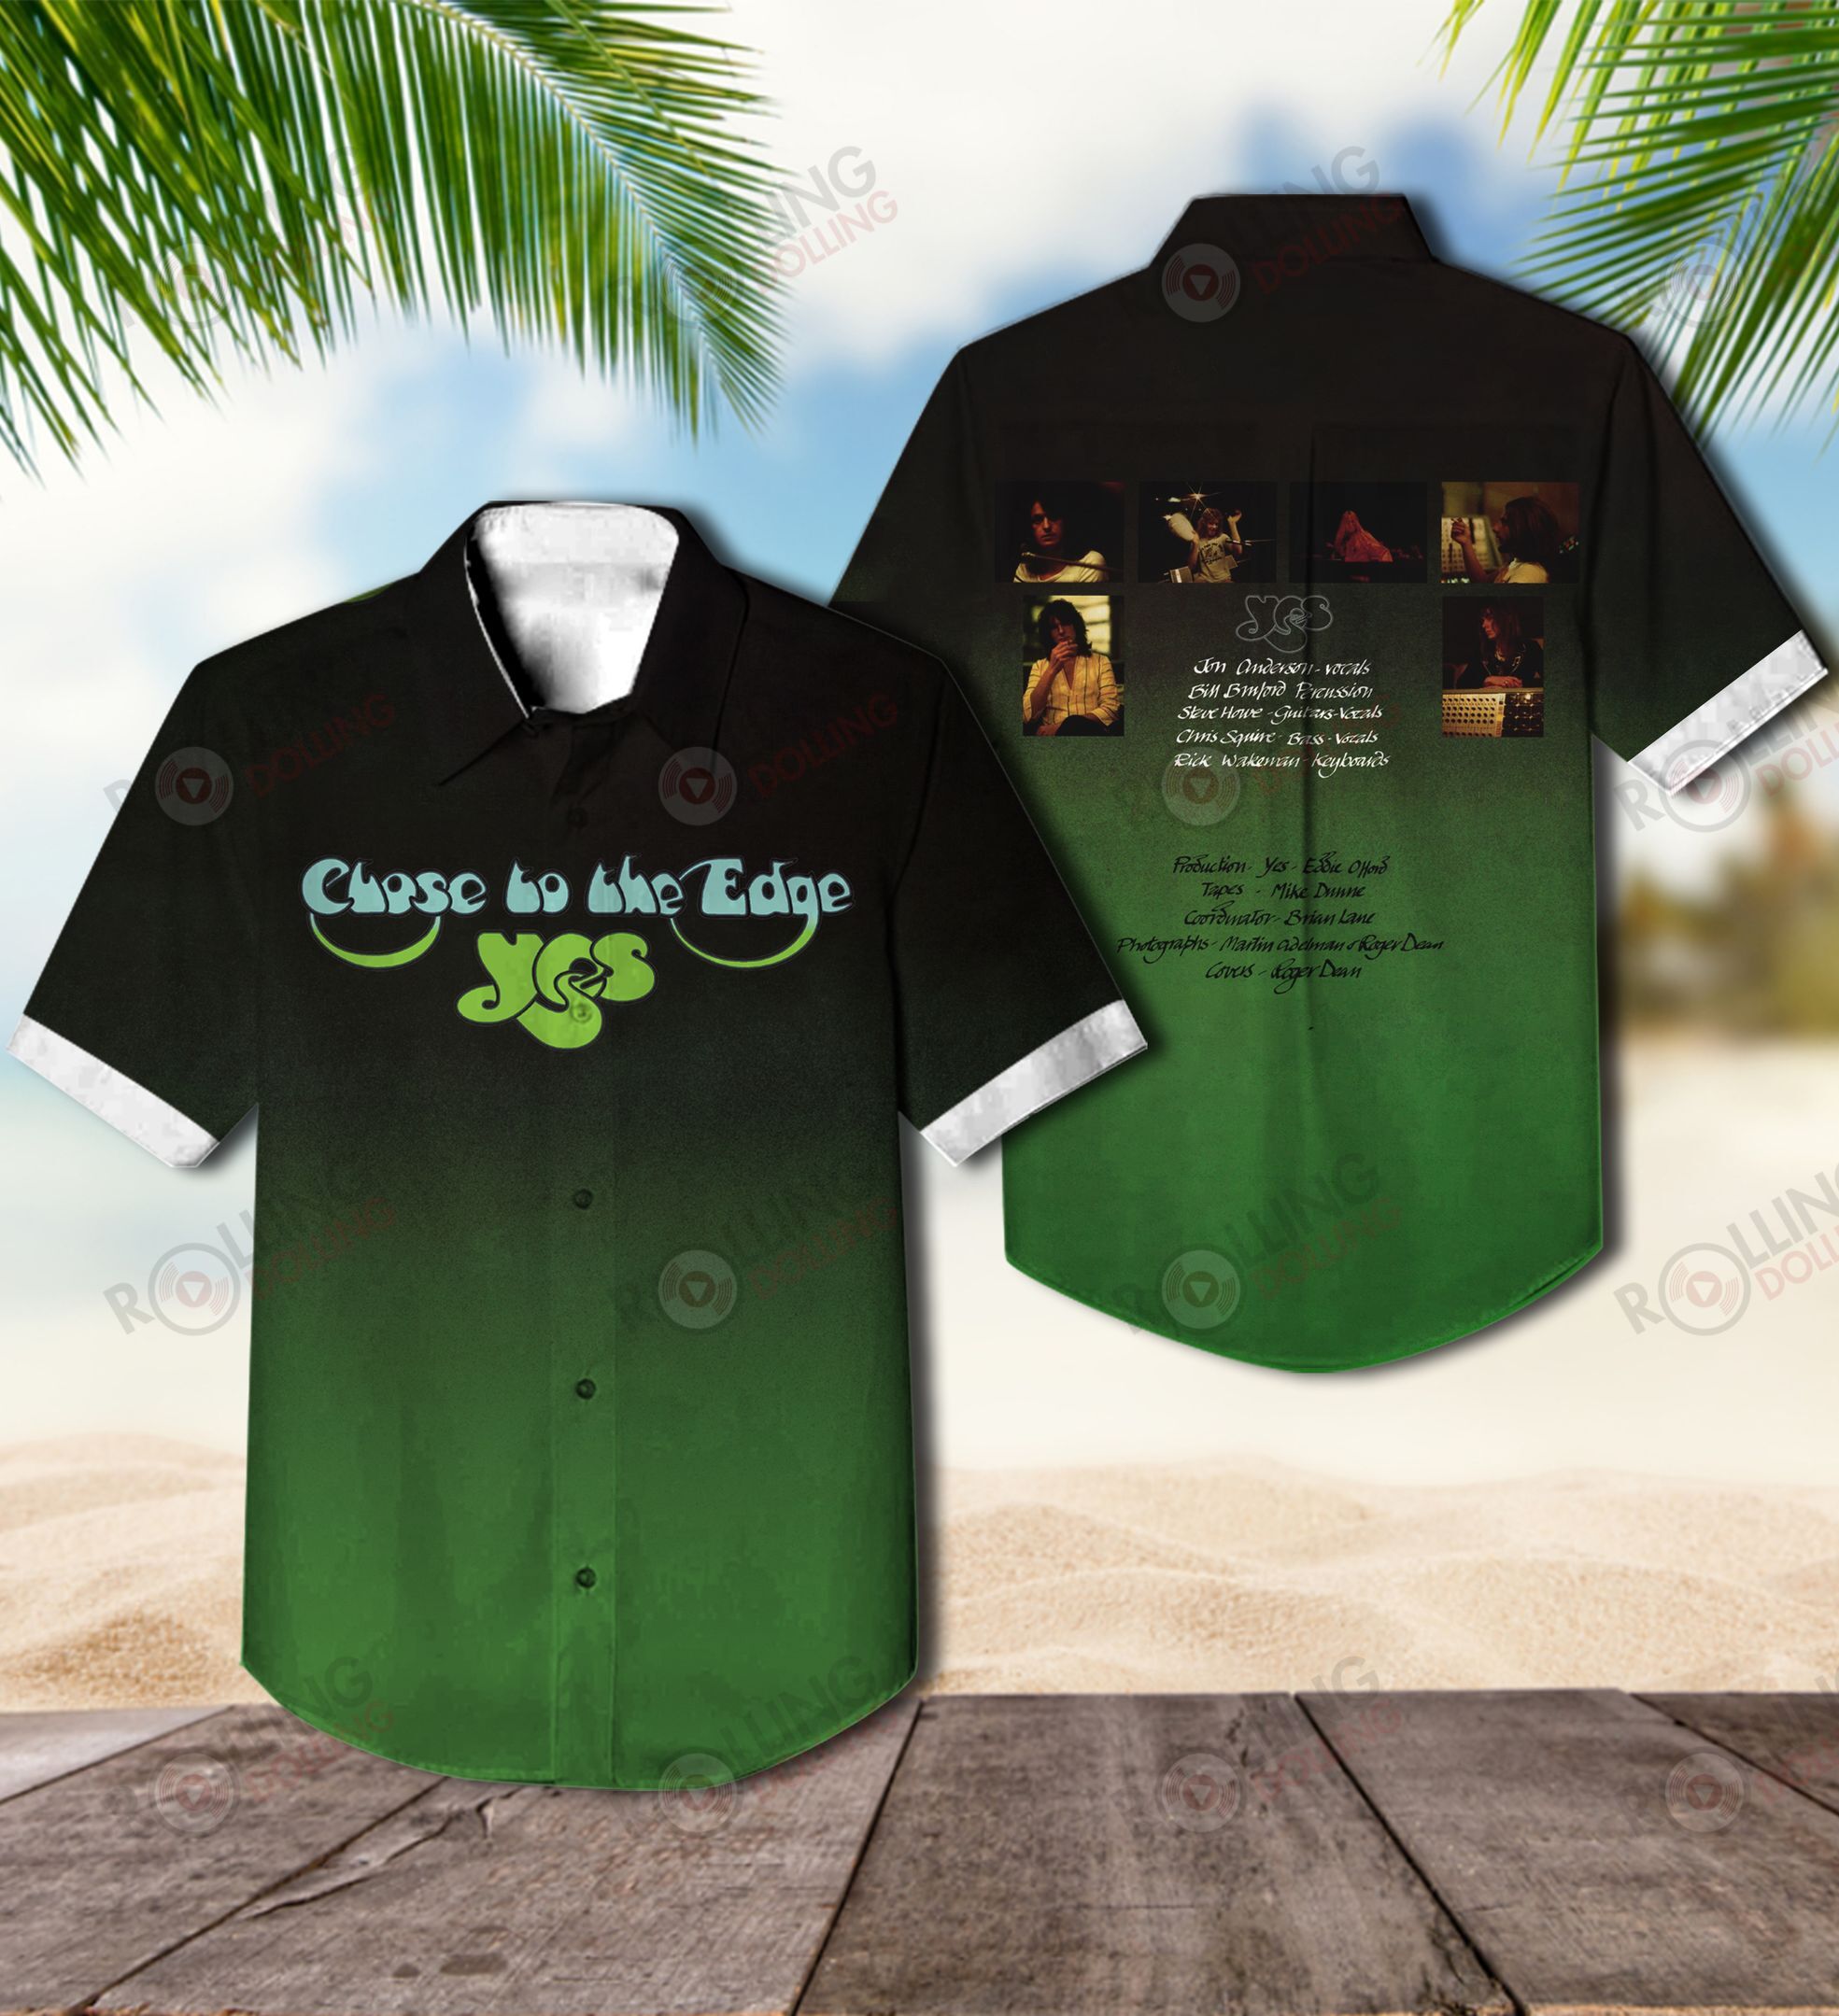 This would make a great gift for any fan who loves Hawaiian Shirt as well as Rock band 45